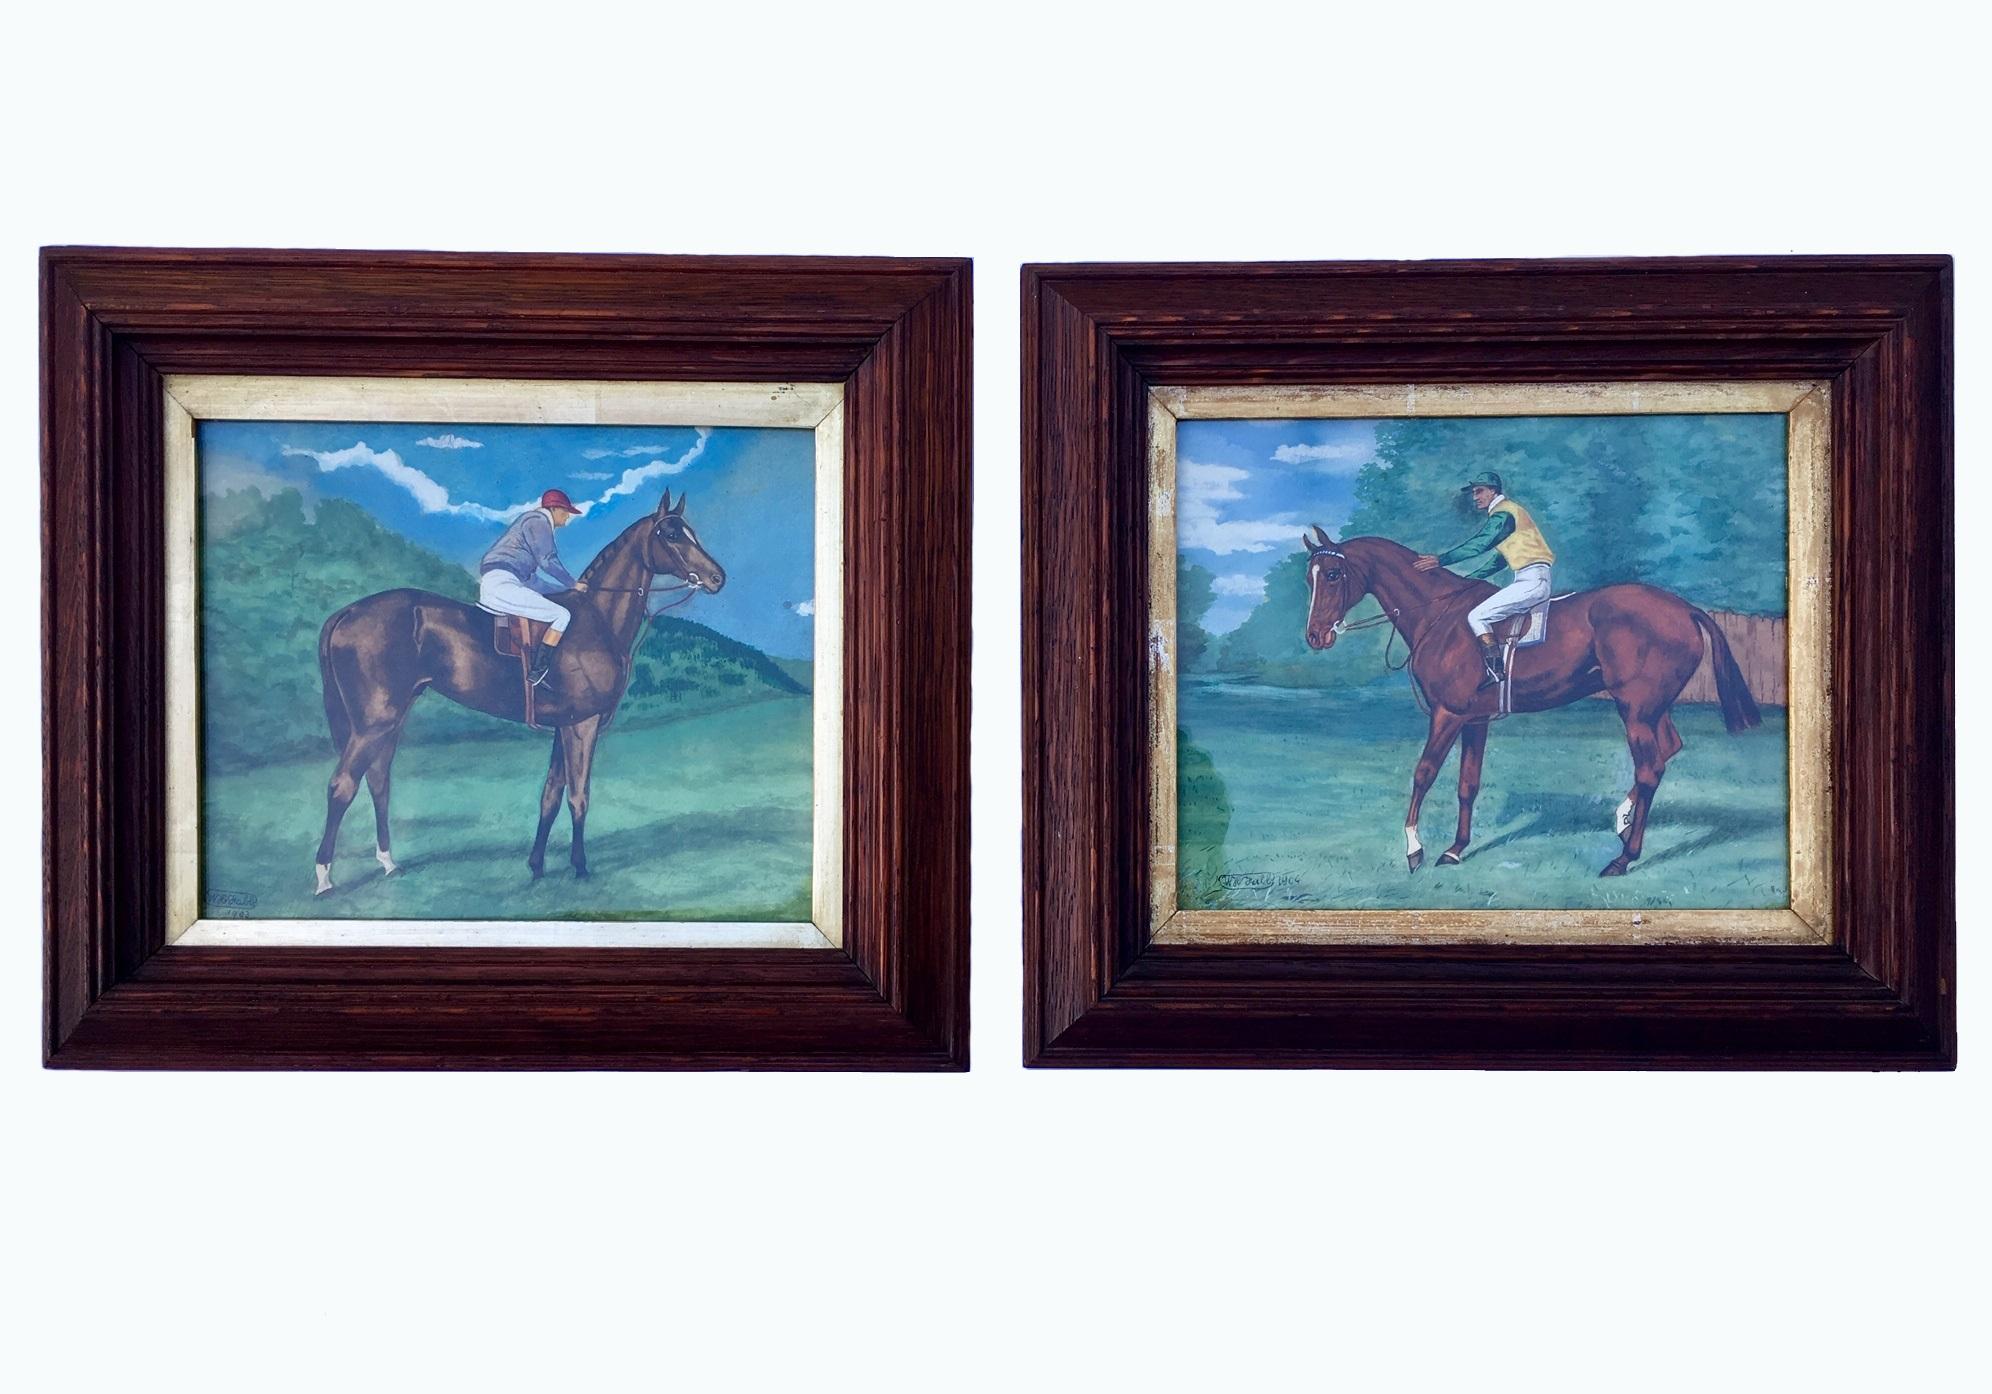 This is a pair of watercolours of the famous English Thoroughbred, SCEPTRE, with Jockey, Randall, up - winner of the St. Leger and Oaks Derby in the 1902 Classics. The signed and dated watercolours (W.H. Fabb 1903/1904) are artisticly executed and